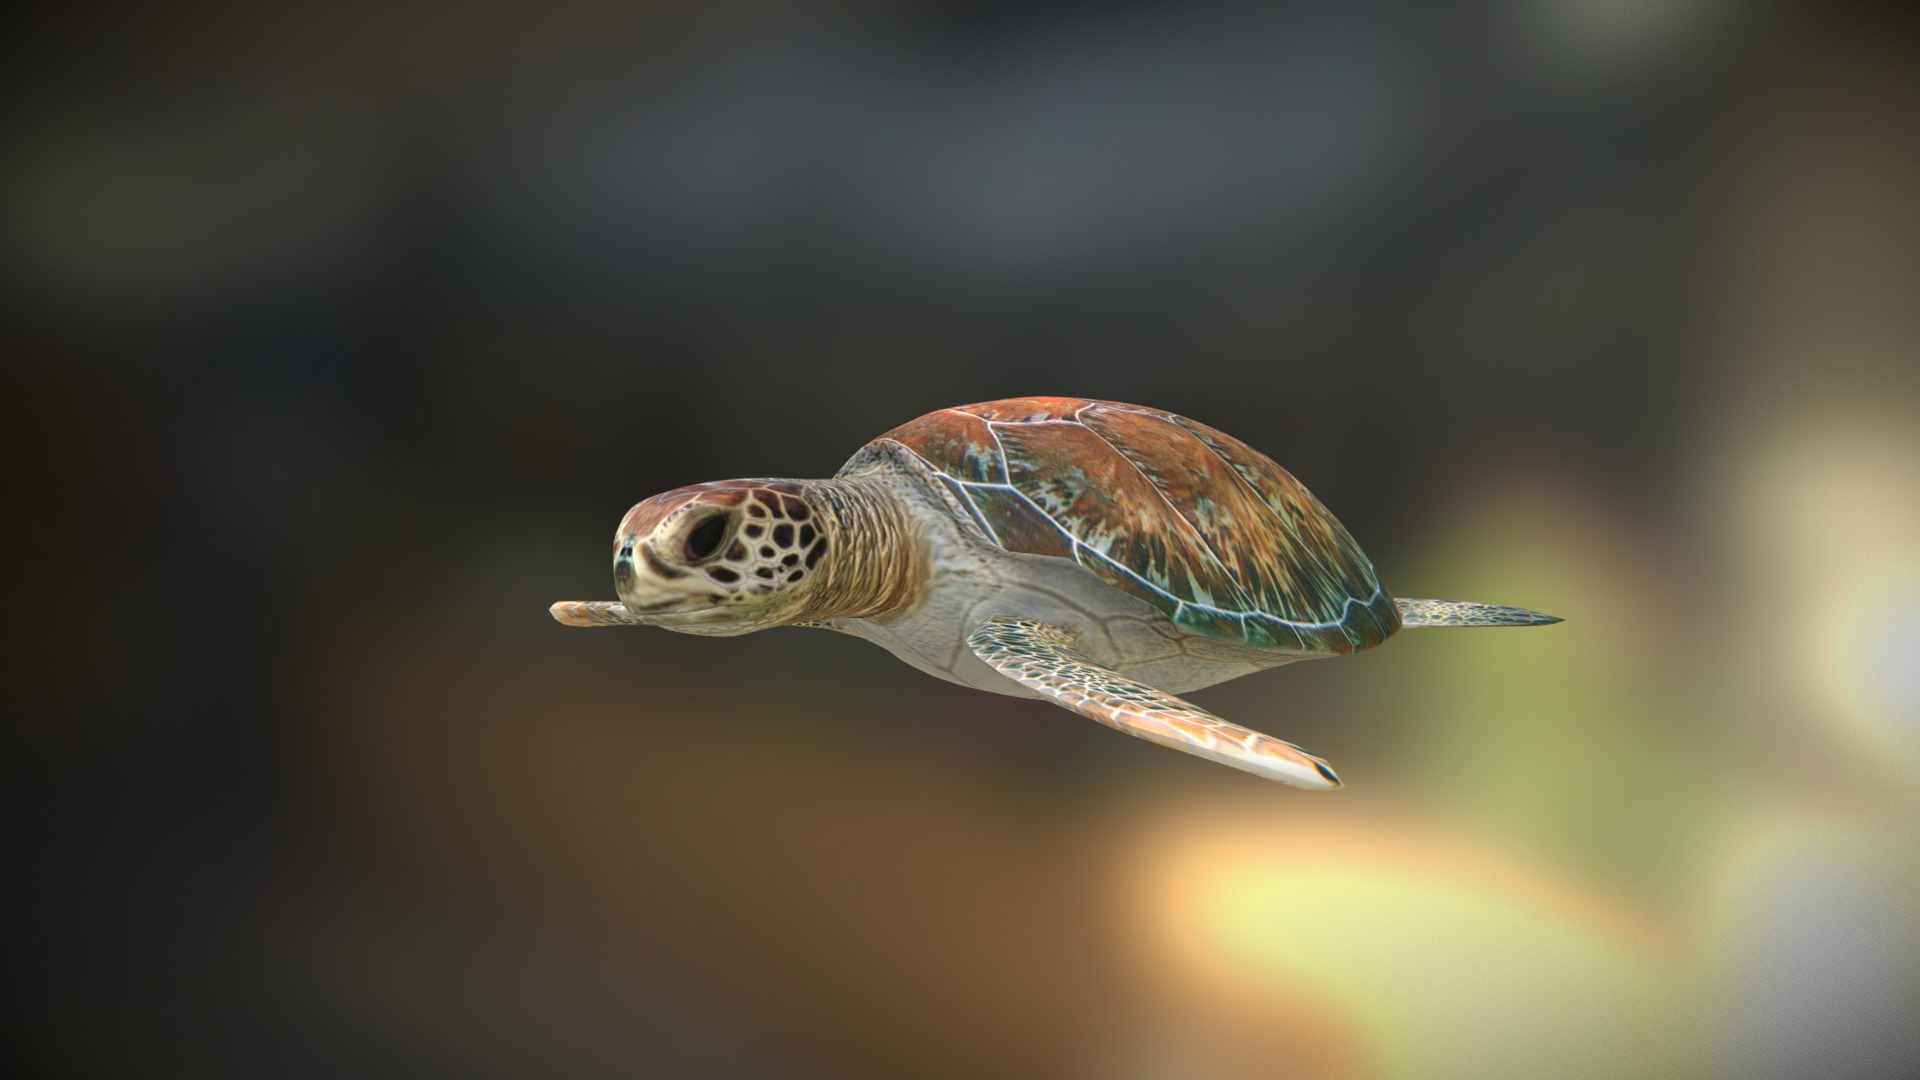 3D model Sea turtle - This is a 3D model of the Sea turtle. The 3D model is about a turtle swimming in water.